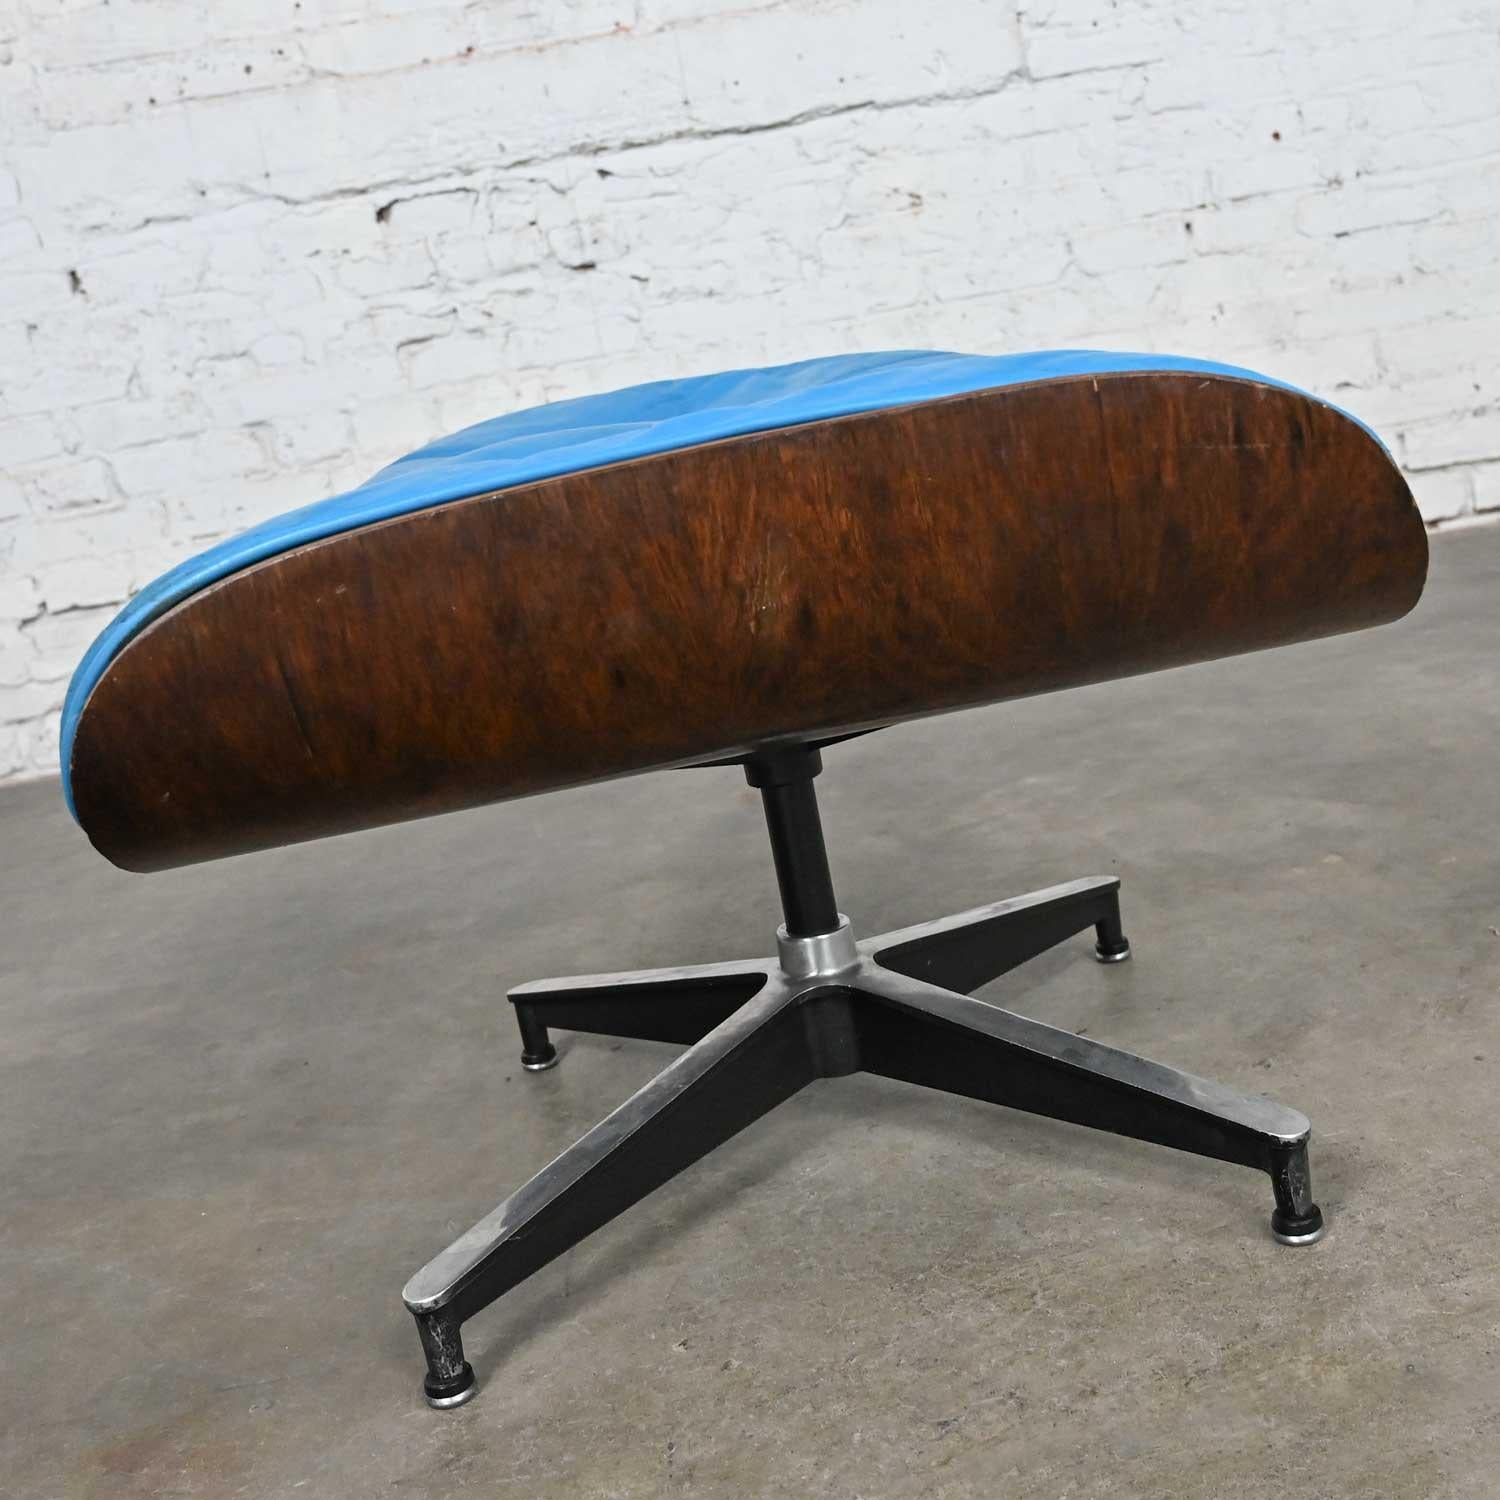 Eames 670 Lounge Chair 671 Ottoman Blue Leather Walnut Rosewood Herman Miller 5